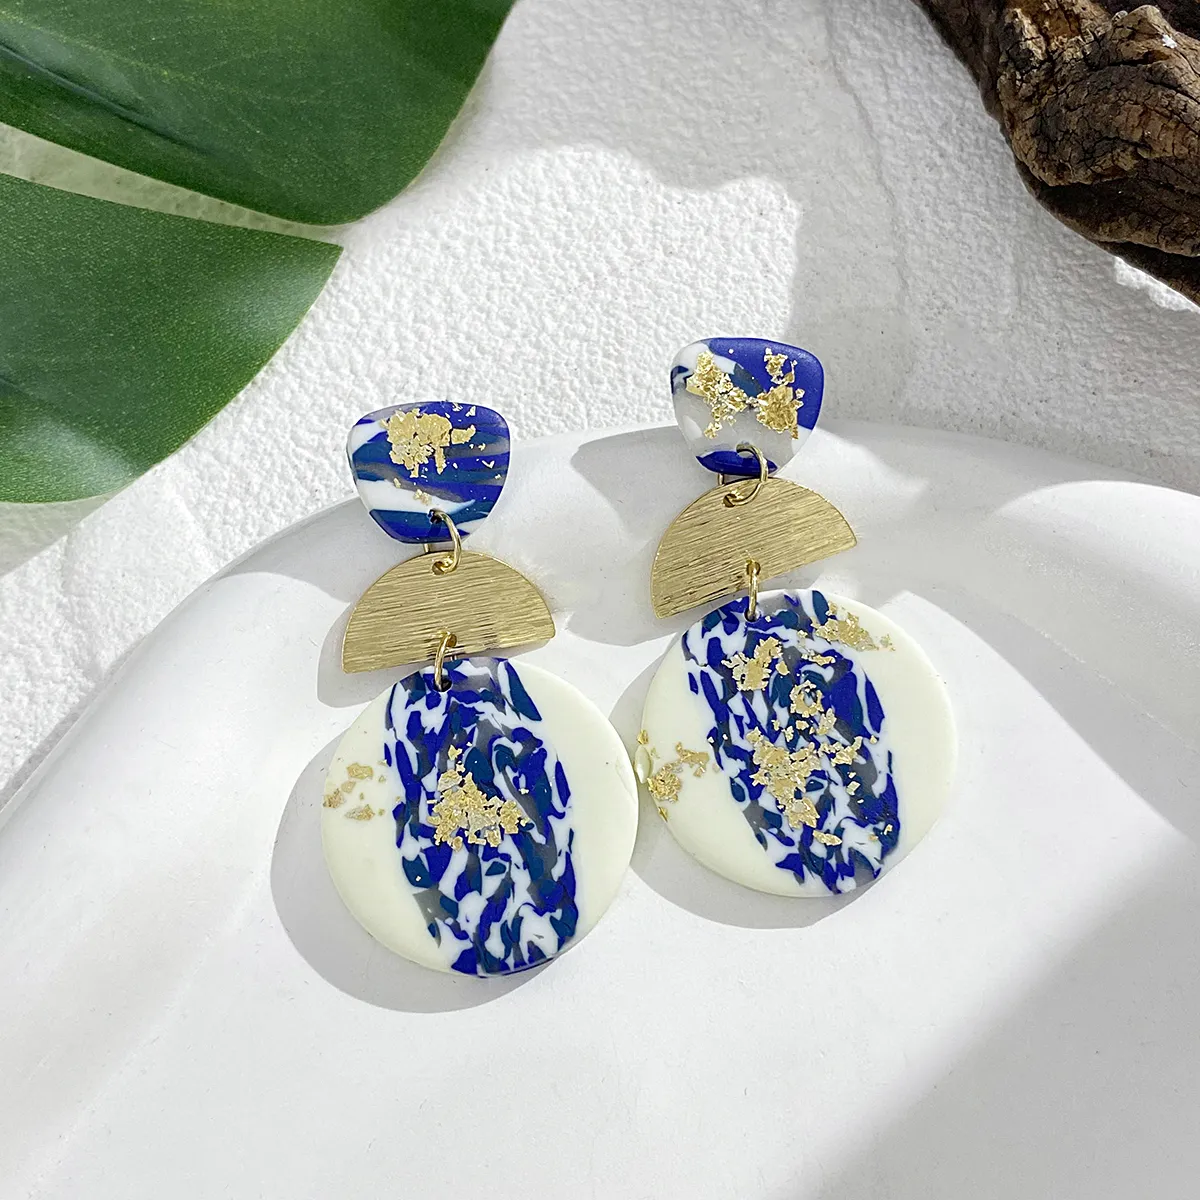 AENSOA Blue and White Porcelain Polymer Clay Drop Earrings for Women Gold Color Foil Geometric Round Earrings Ethnic Jewelry